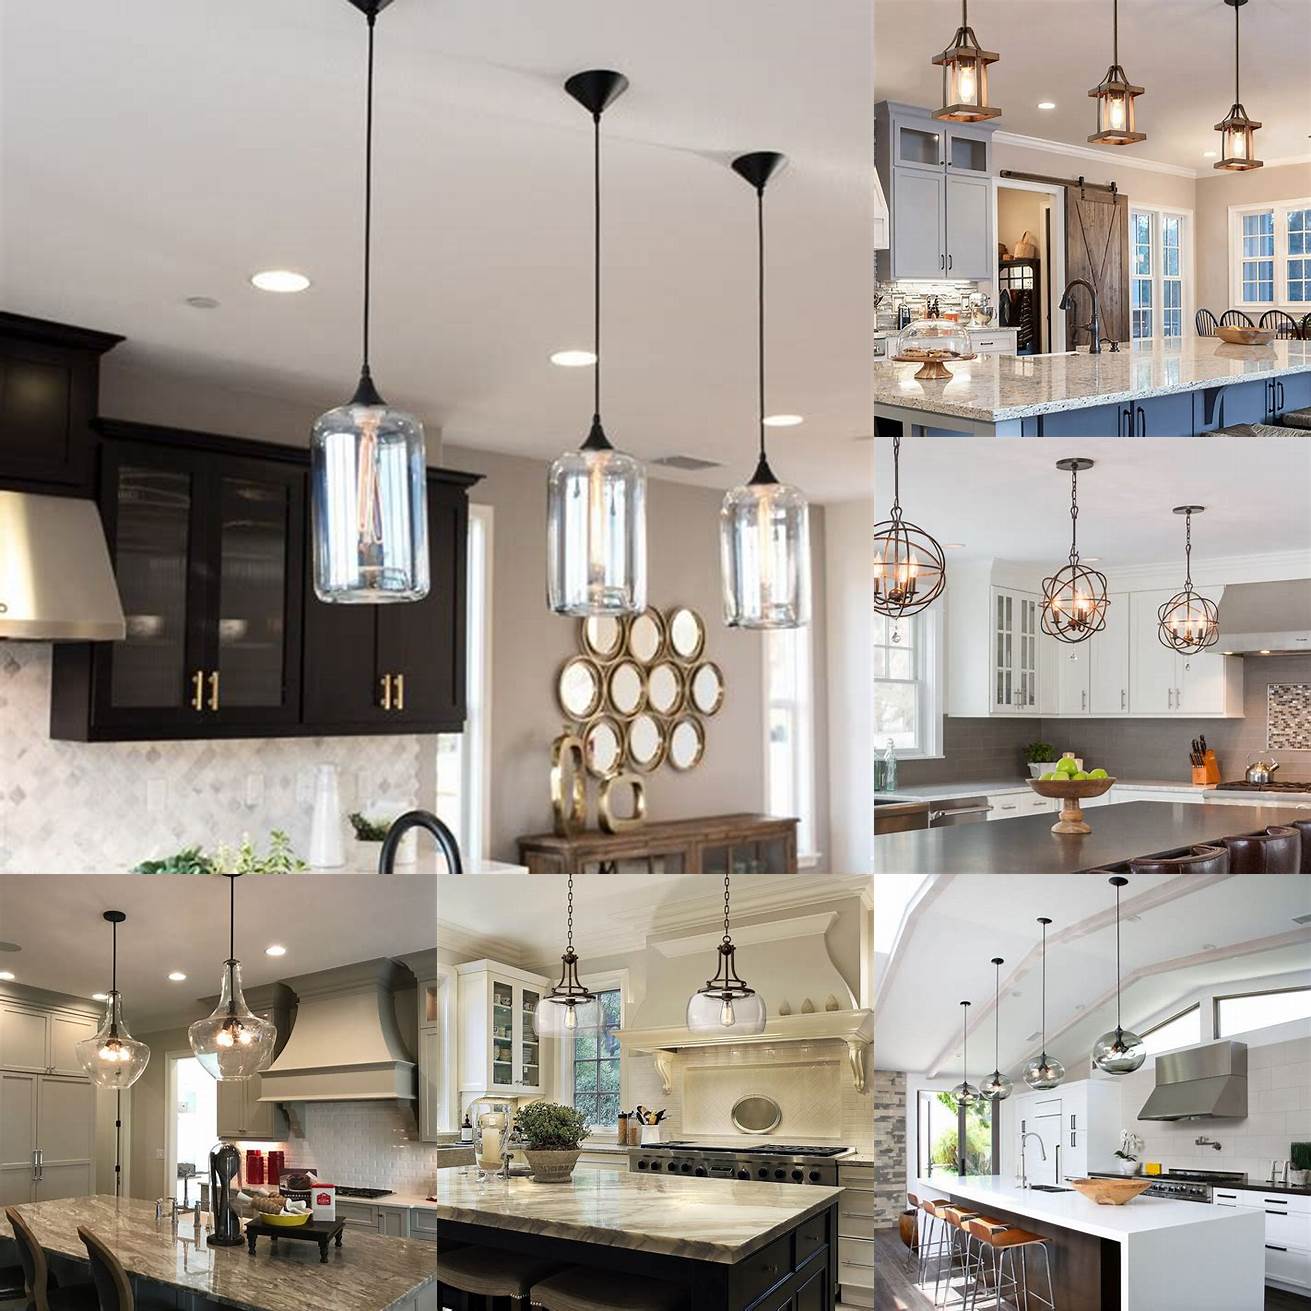 Pendant lights a stylish way to add some light to your kitchen